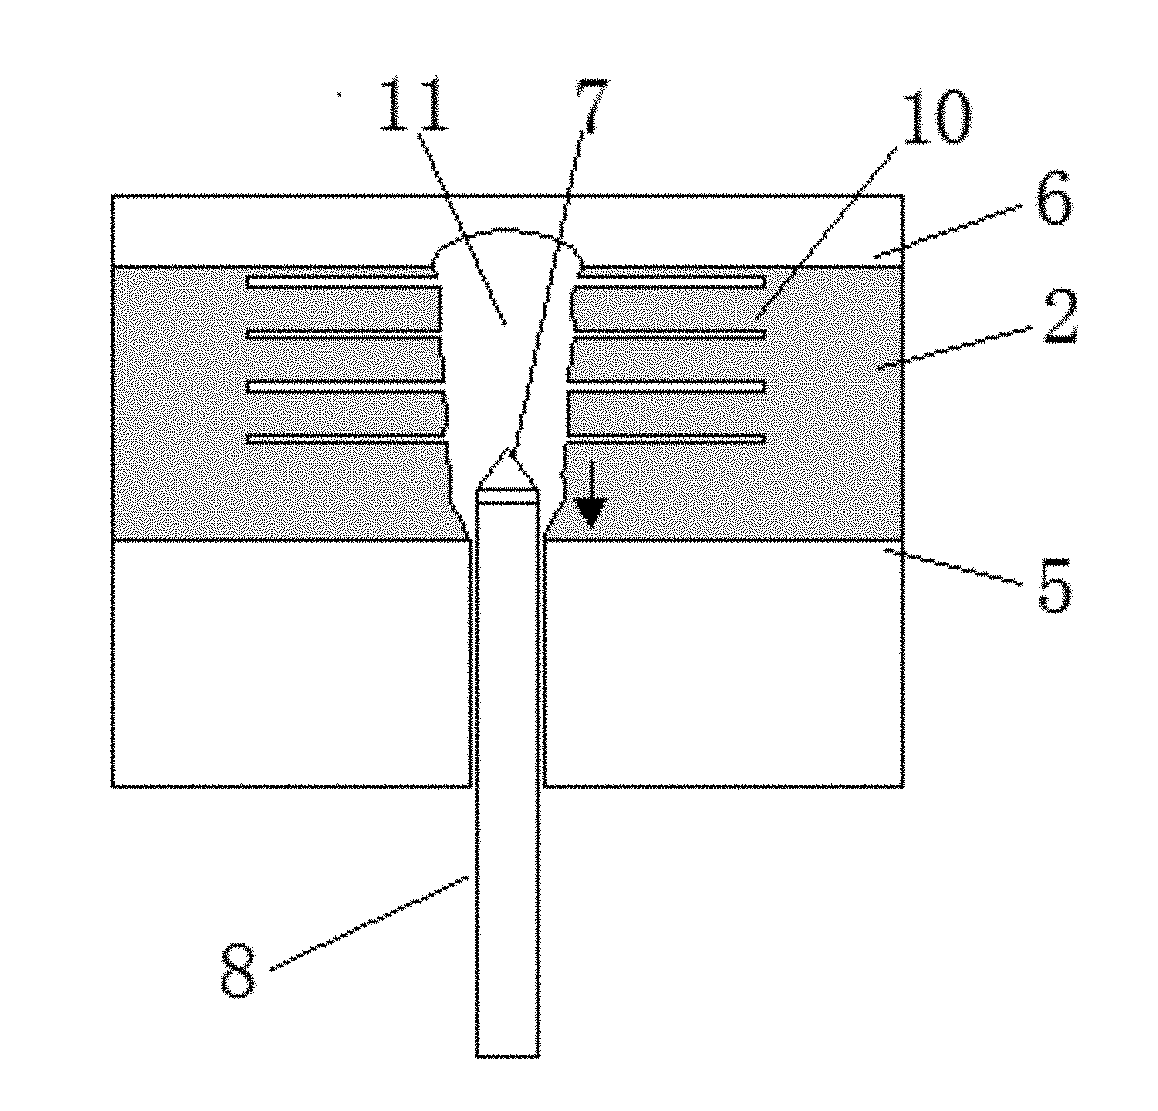 Method of performing combined drilling, flushing, and cutting operations on coal seam having high gas content and prone to bursts to relieve pressure and increase permeability